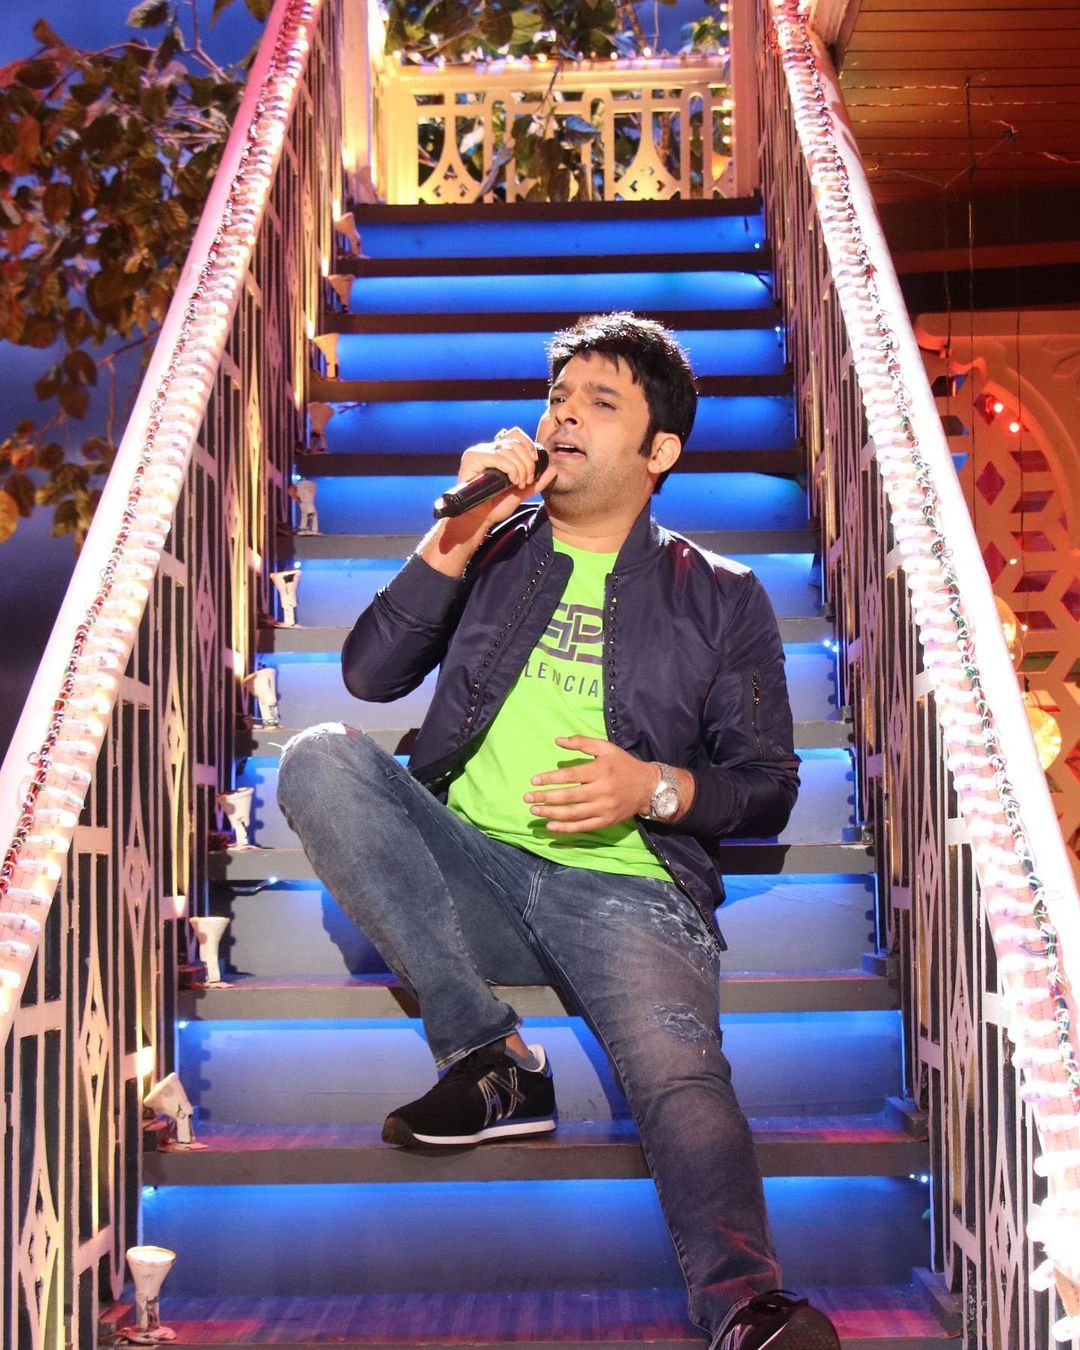 Kapil Sharma Takes Home Rs. 1 Crore For Weekend Episodes Of Kapil Sharma Show, Here's The Salary Of The Remaining Cast